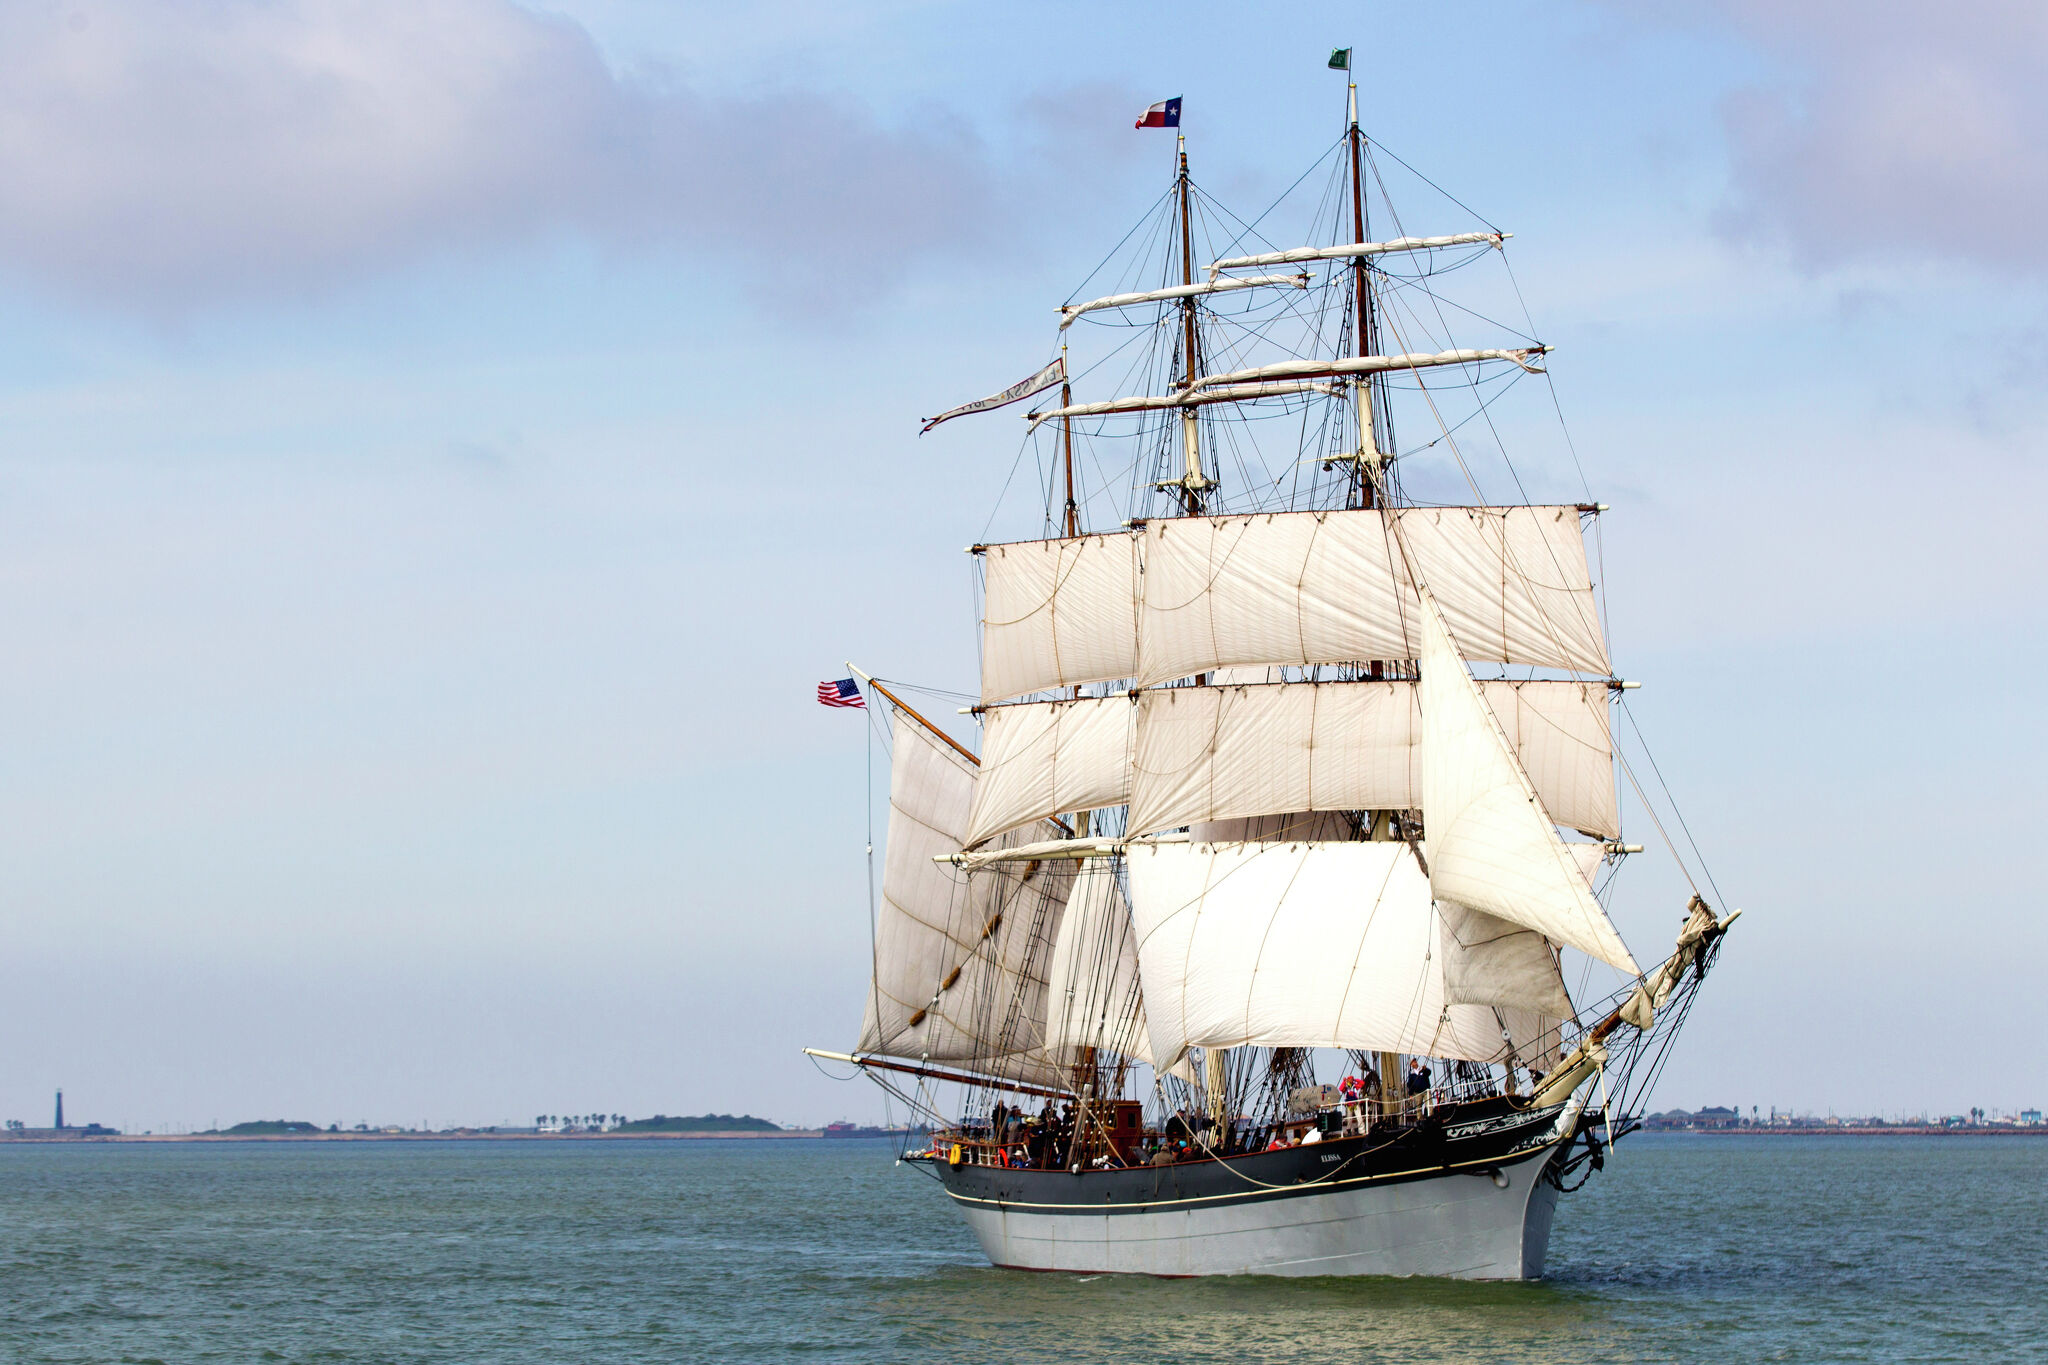 The Tall Ships Challenge returns to Galveston in April